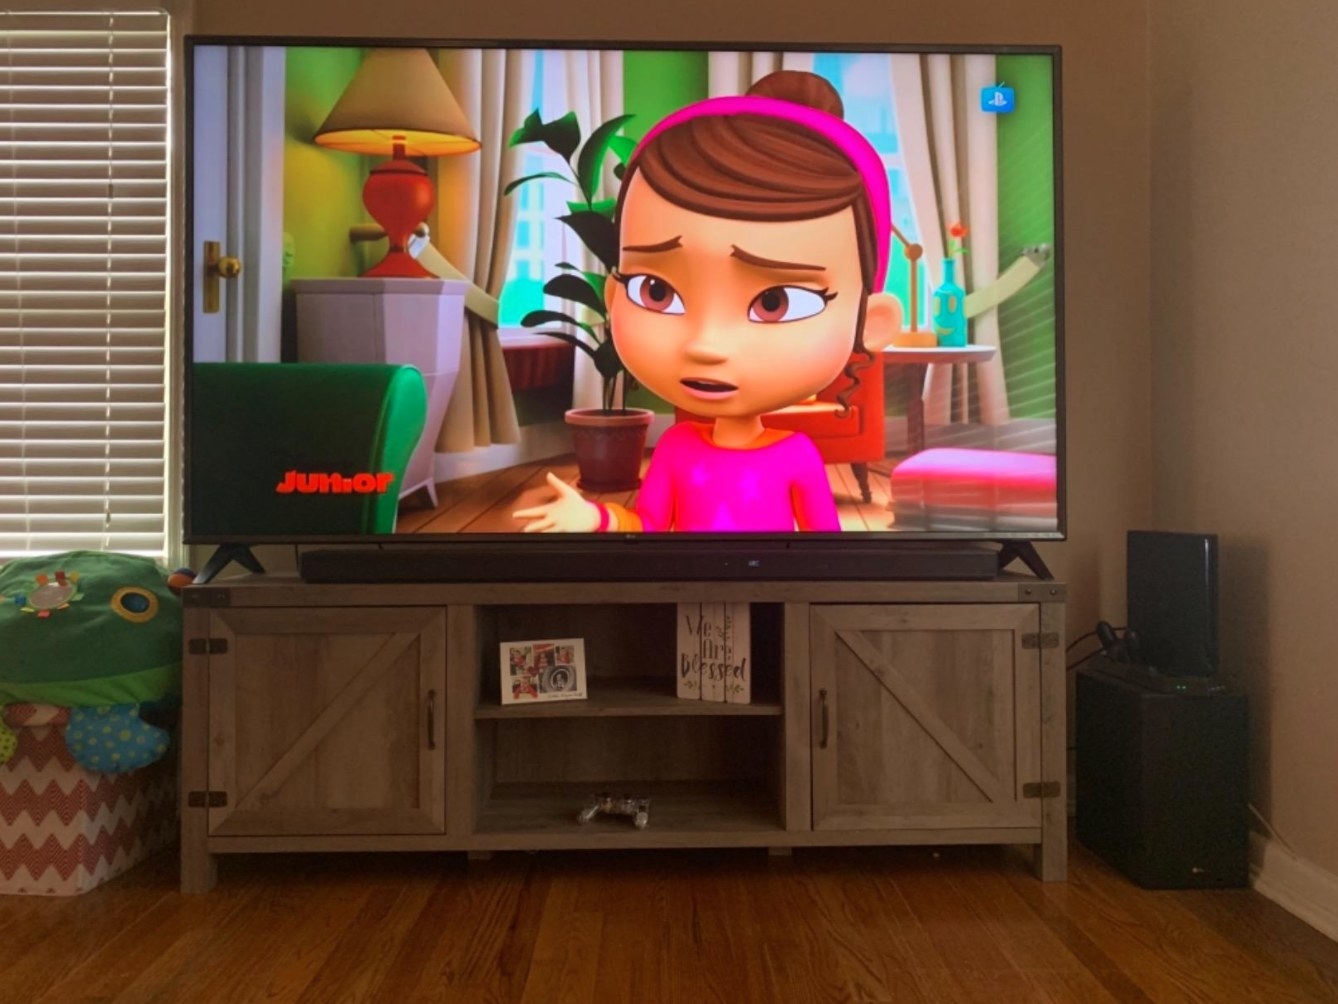 The farmhouse TV stand holding a flat-screen with cartoons on